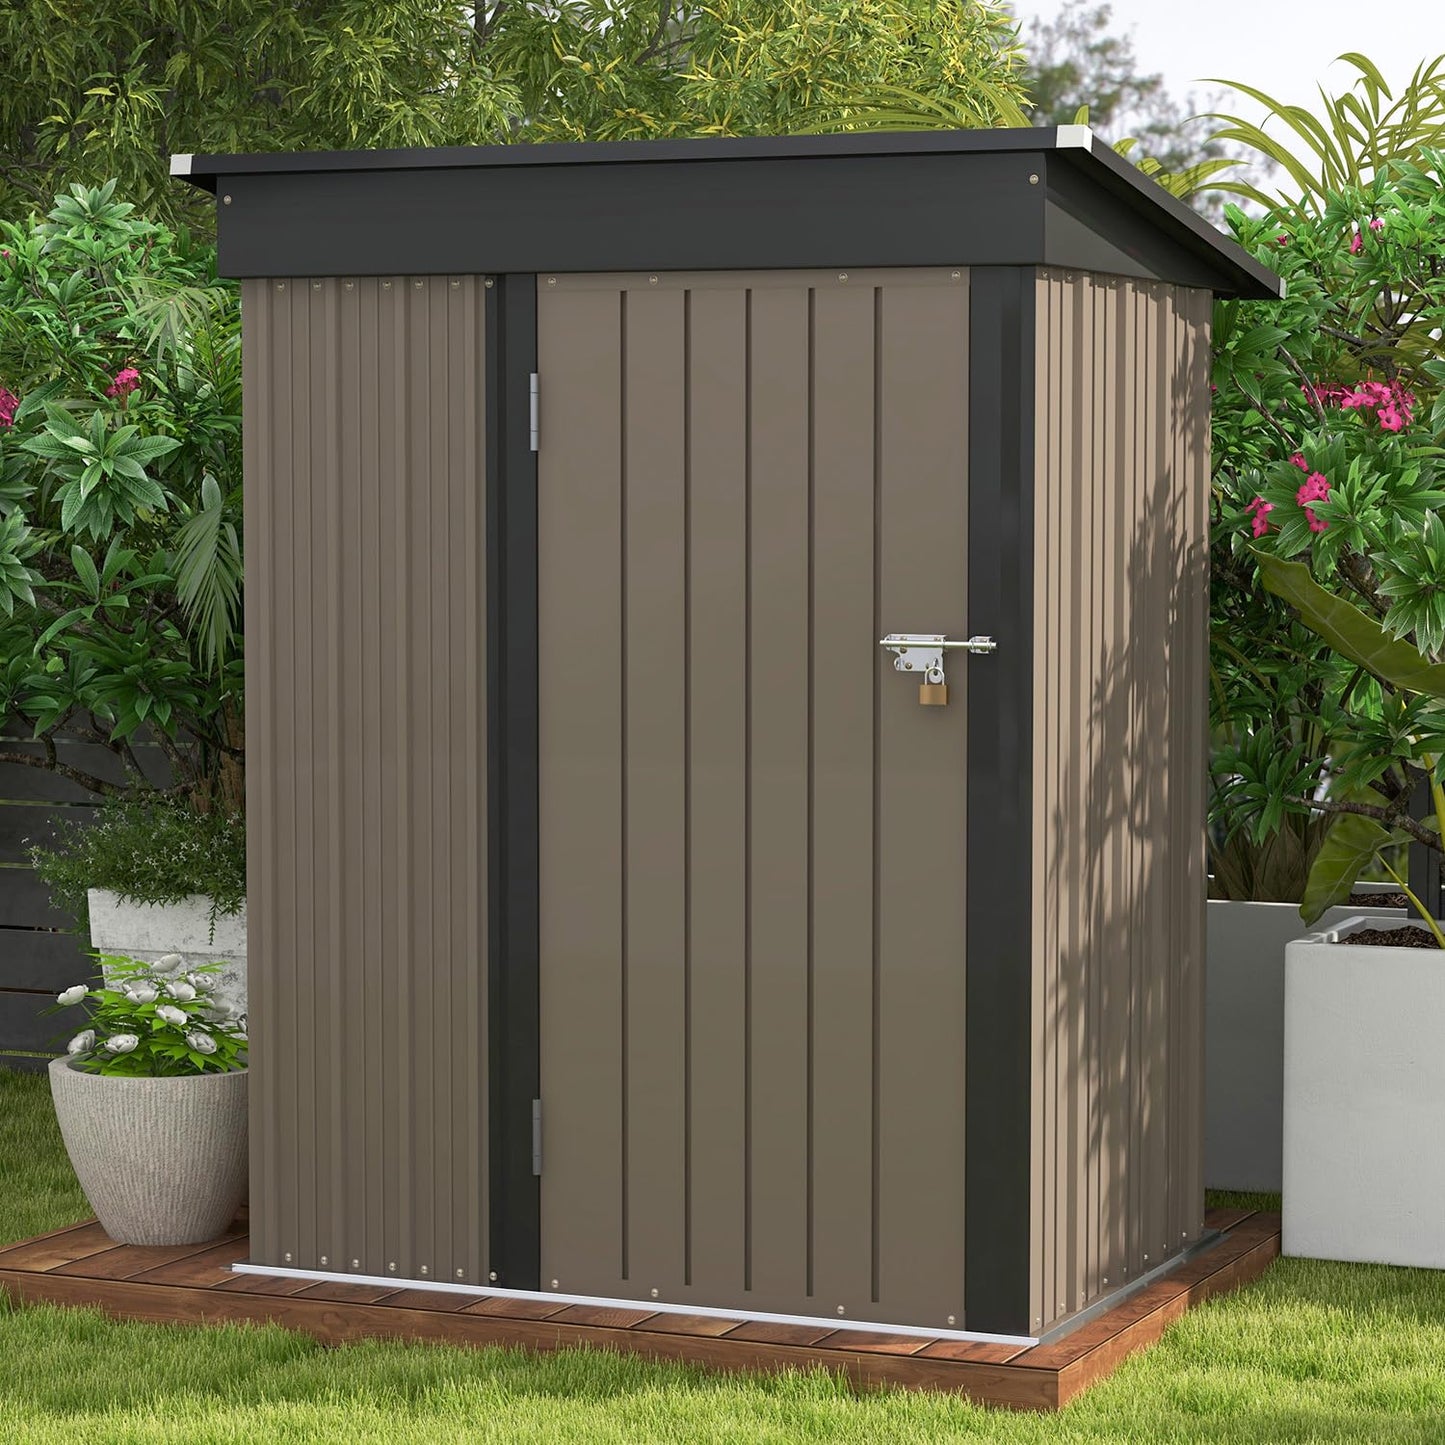 Patiowell 5x3 FT Outdoor Storage Shed, Tool Shed with Sloping Roof and Lockable Door, Metal Shed for Backyard Garden Patio Lawn, Brown